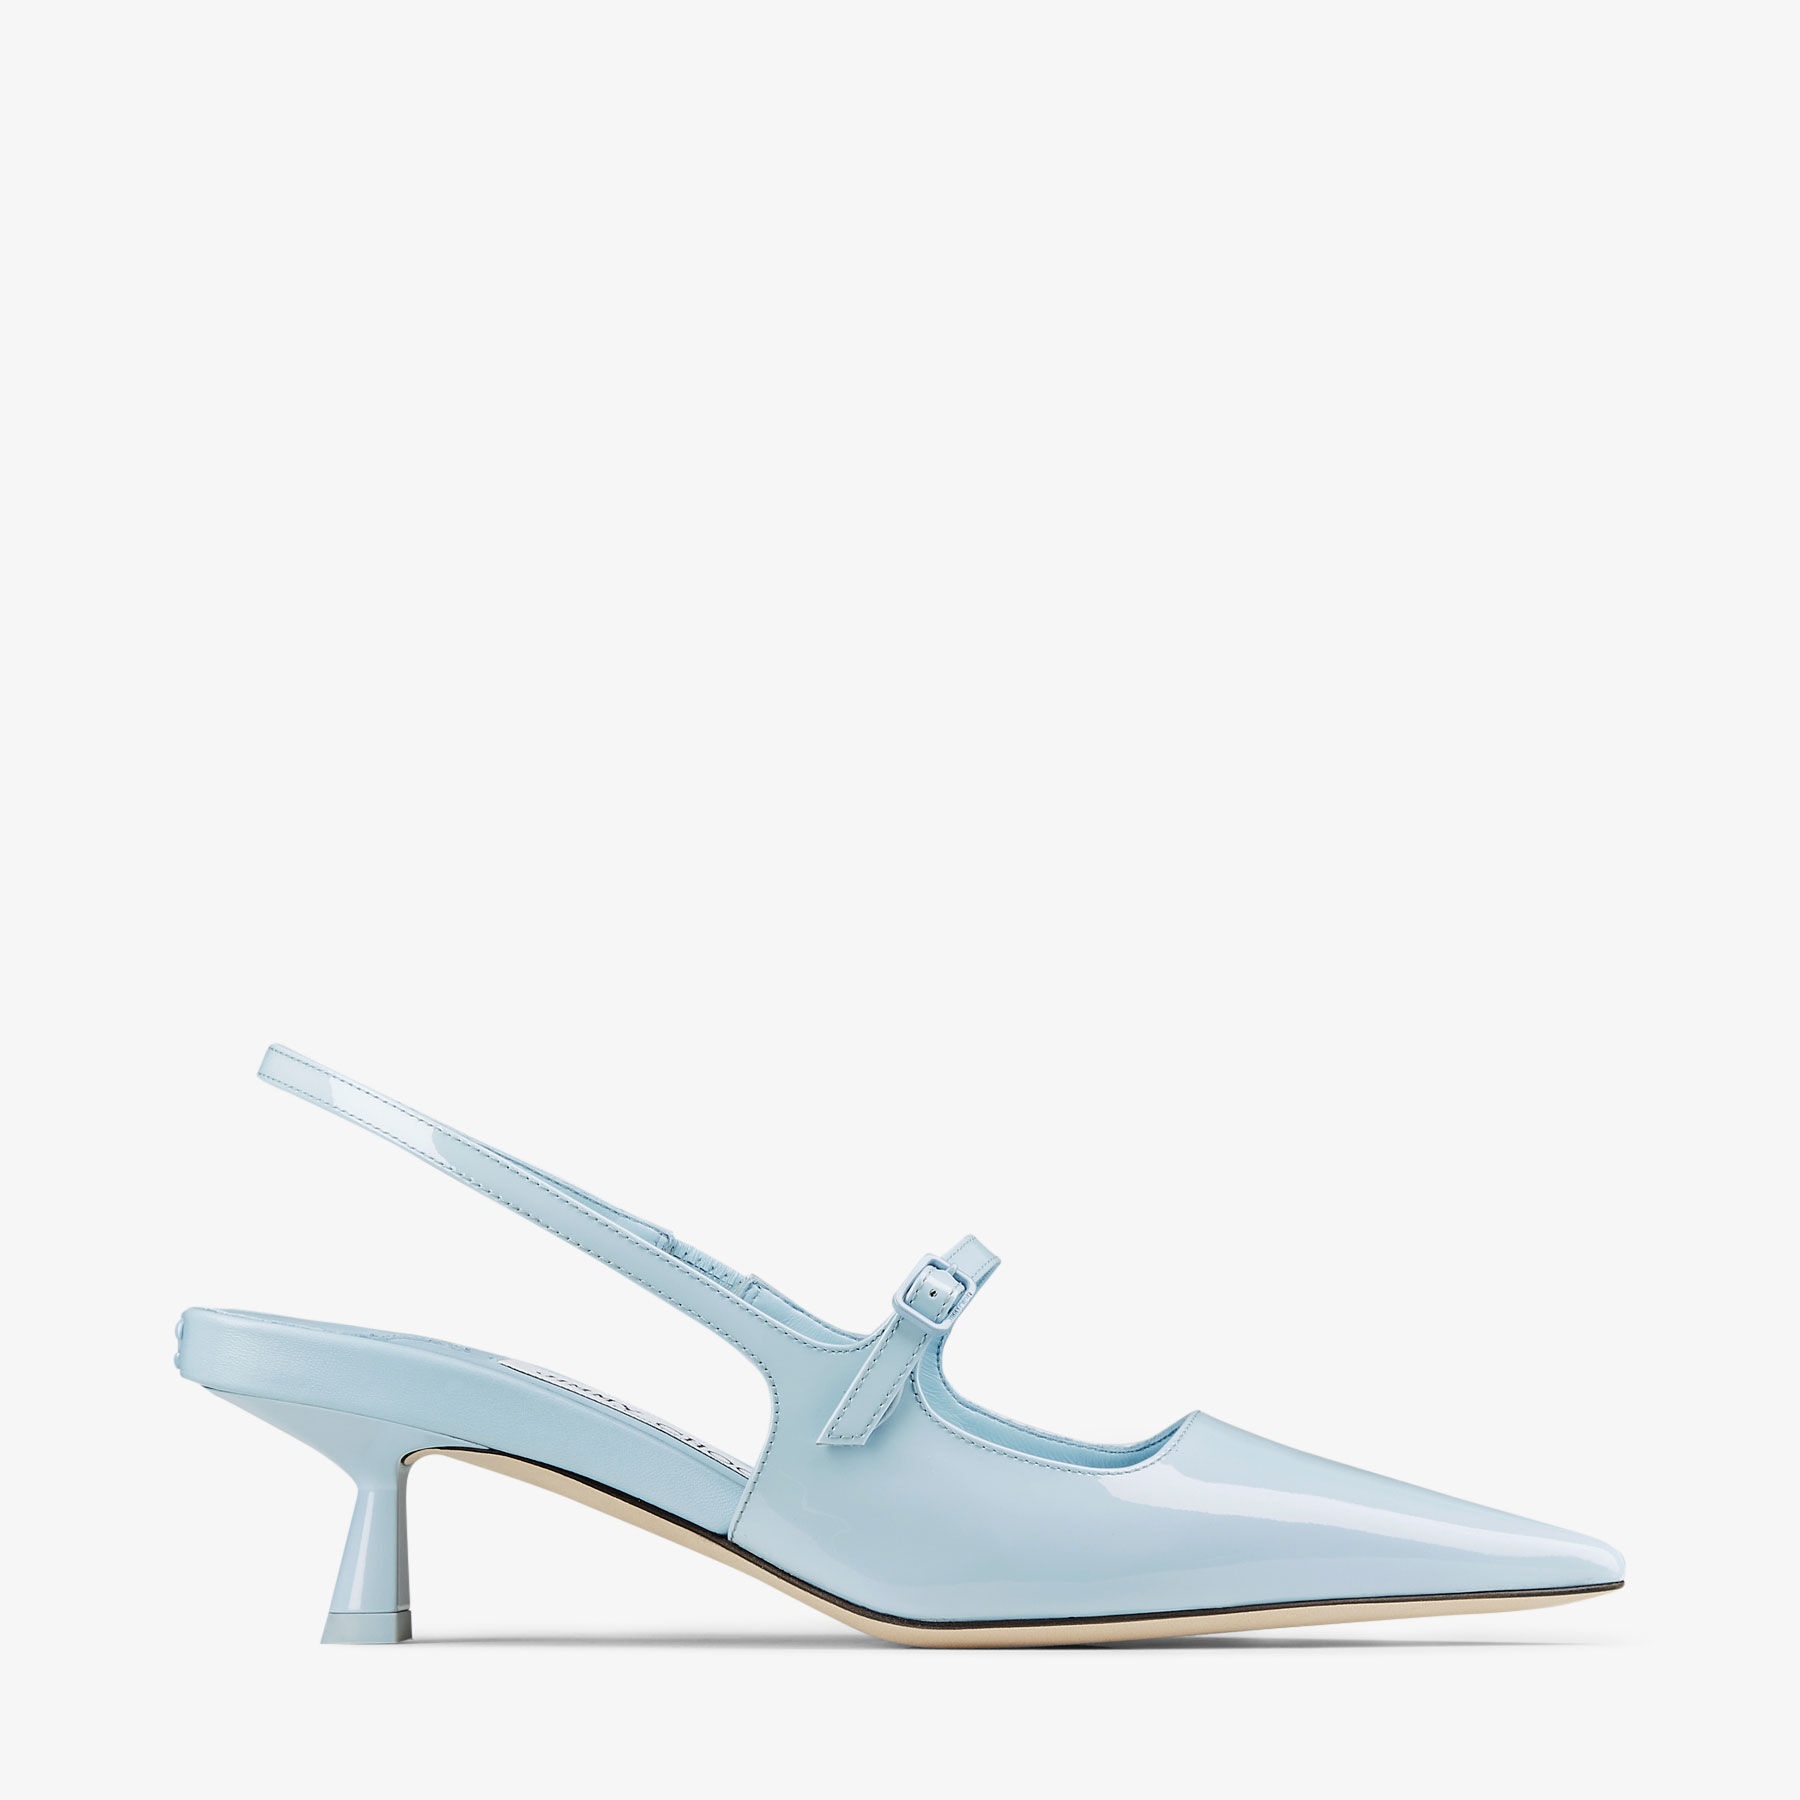 Didi 45
Ice Blue Patent Leather Pointed Pumps - 1